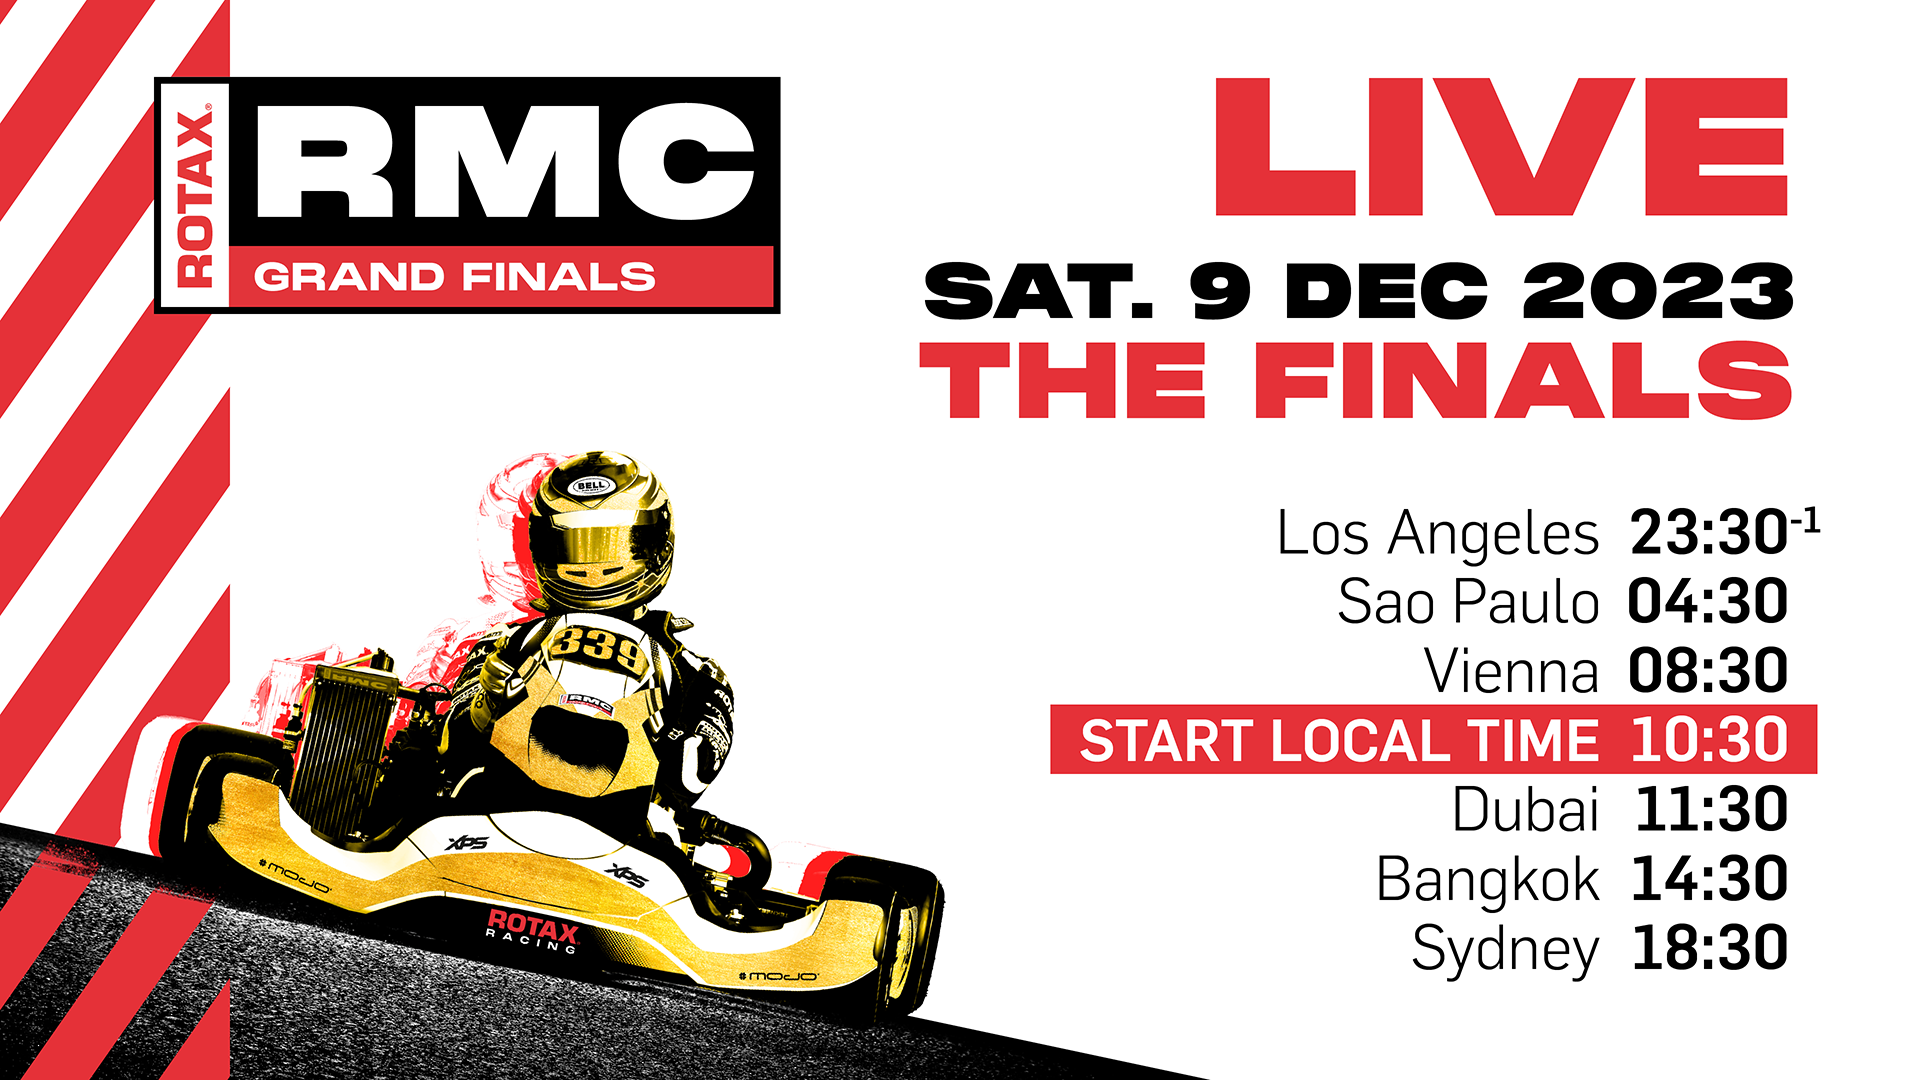 ROTAX RMCGF 2023 You Tube Channel FINALS 1920x1080px